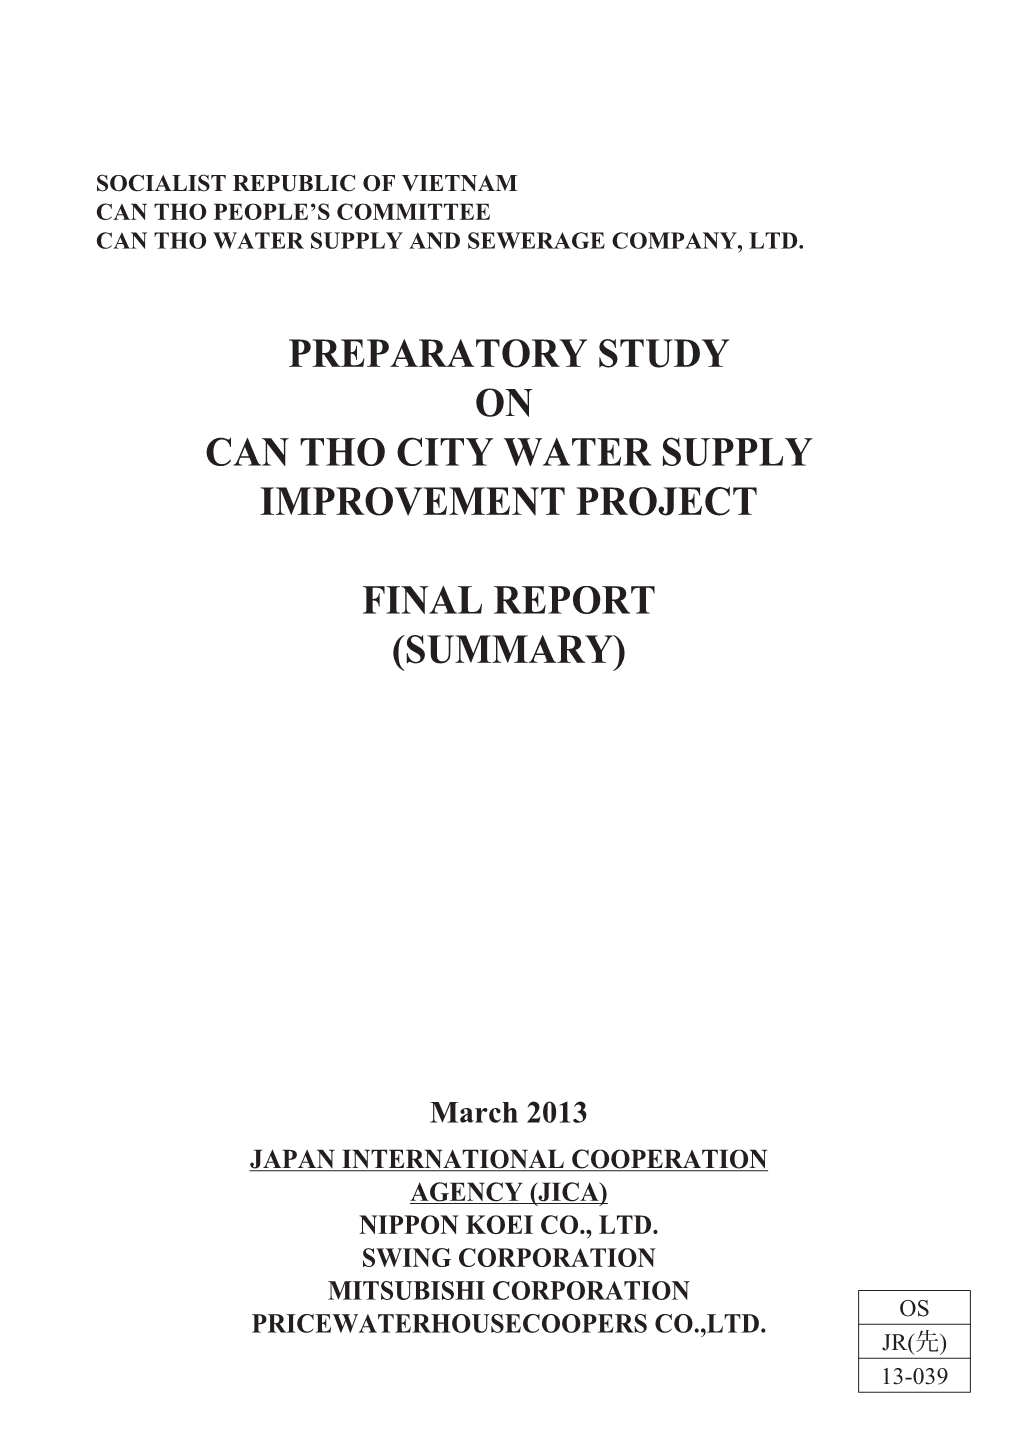 Preparatory Study on Can Tho City Water Supply Improvement Project Final